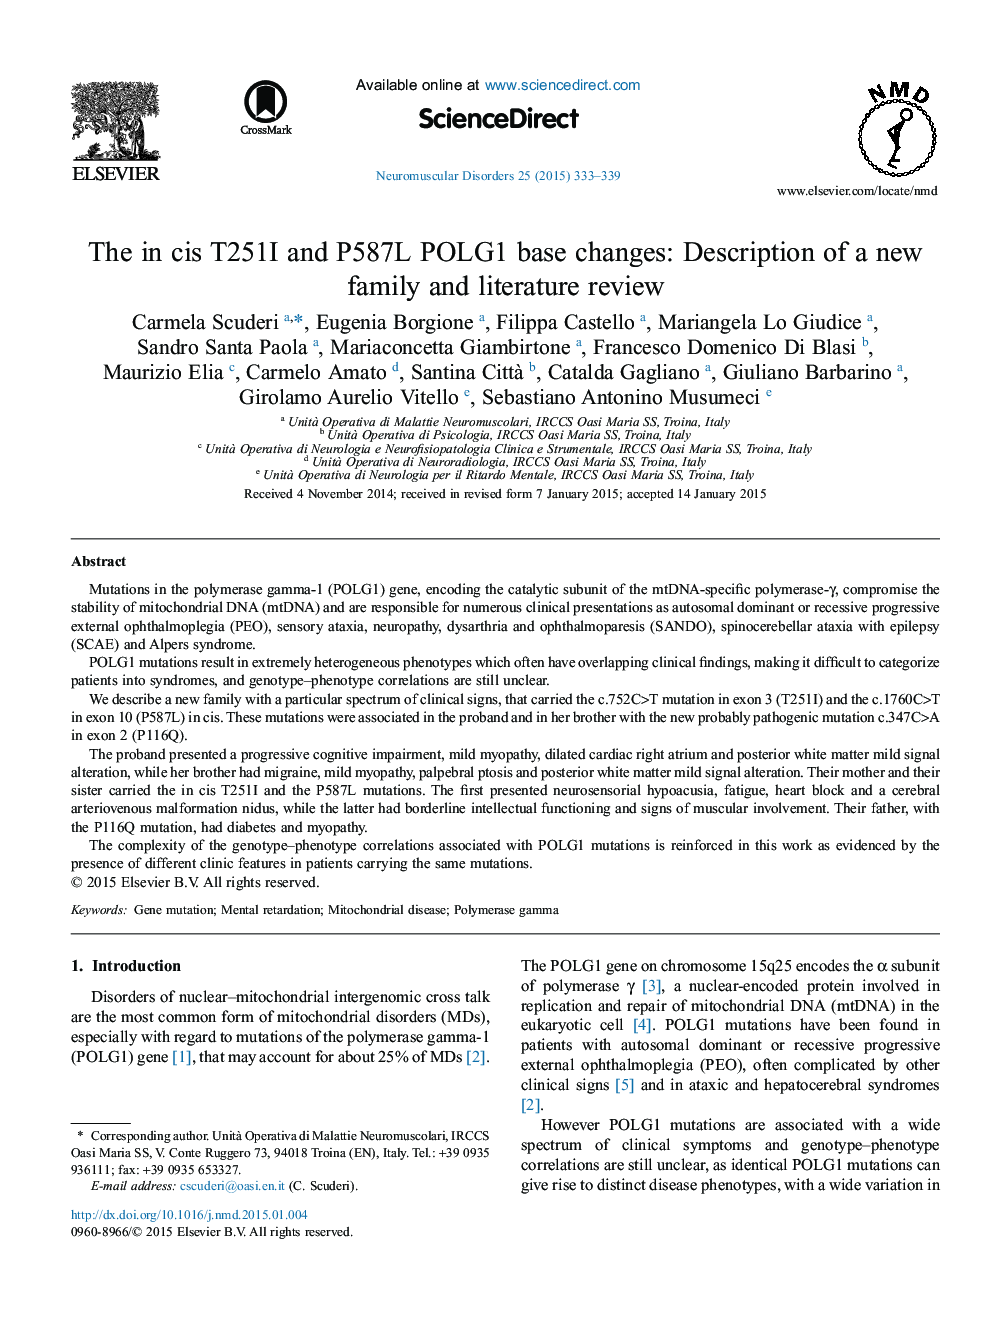 The in cis T251I and P587L POLG1 base changes: Description of a new family and literature review